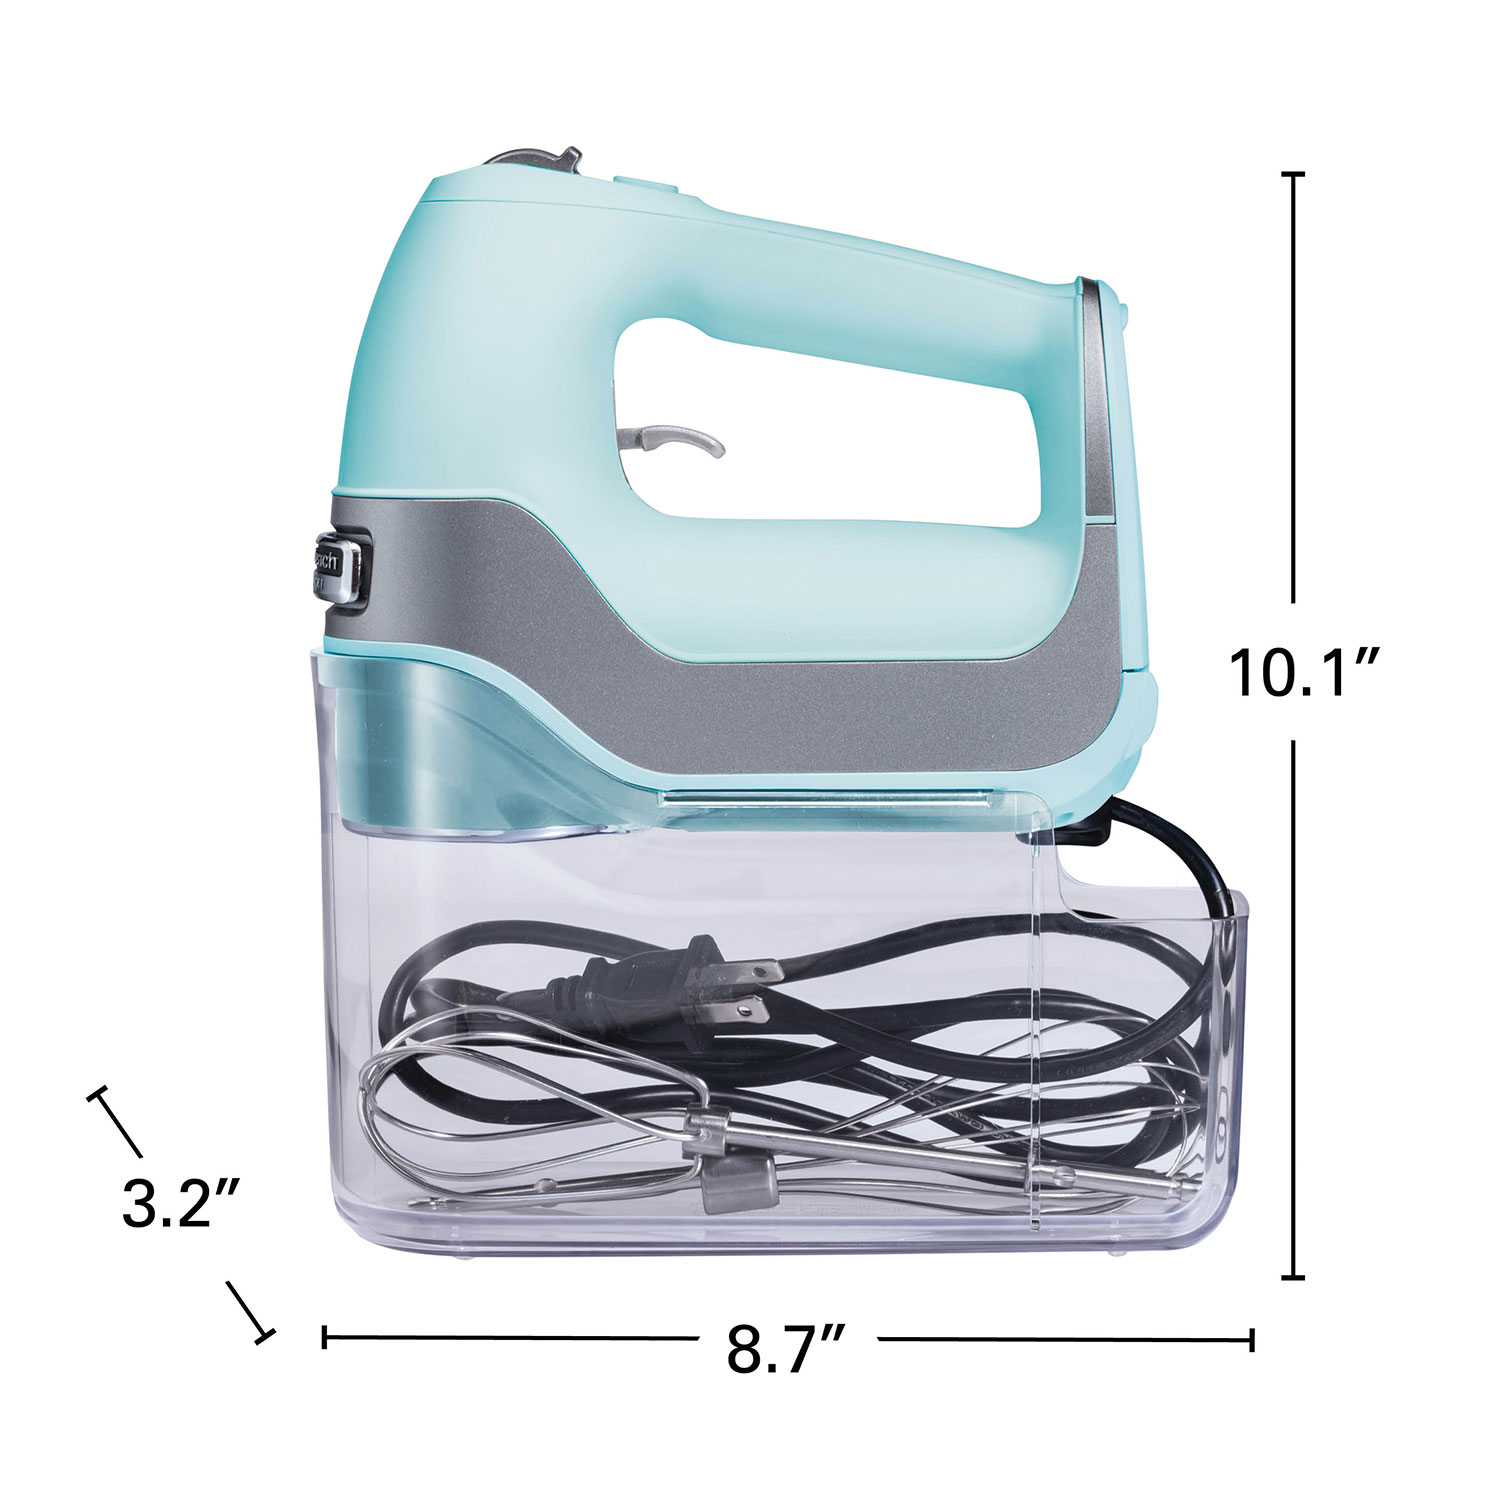 Hamilton Beach Professional 5 Speed Hand Mixer with Snap-on Case